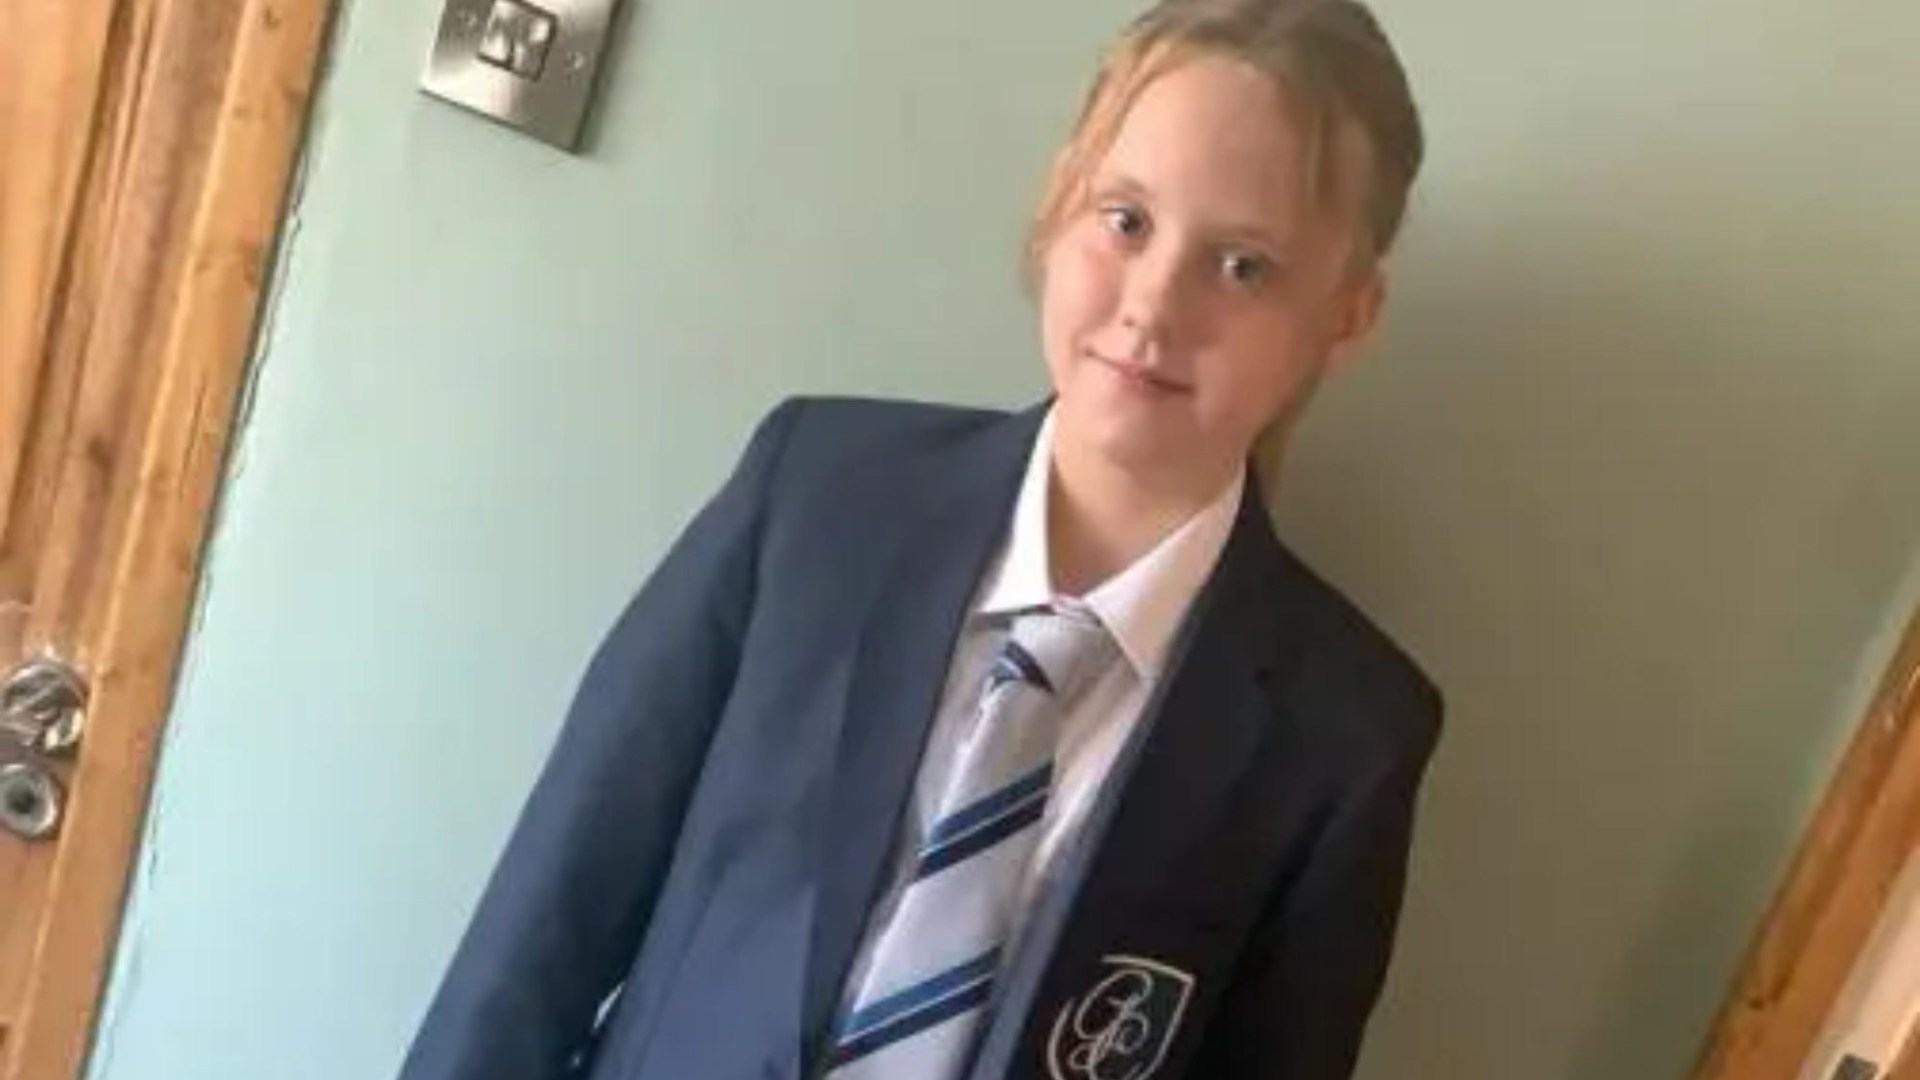 My daughter, 11, was sent home from first day at secondary school over her new shoes – now she doesn’t want to go back